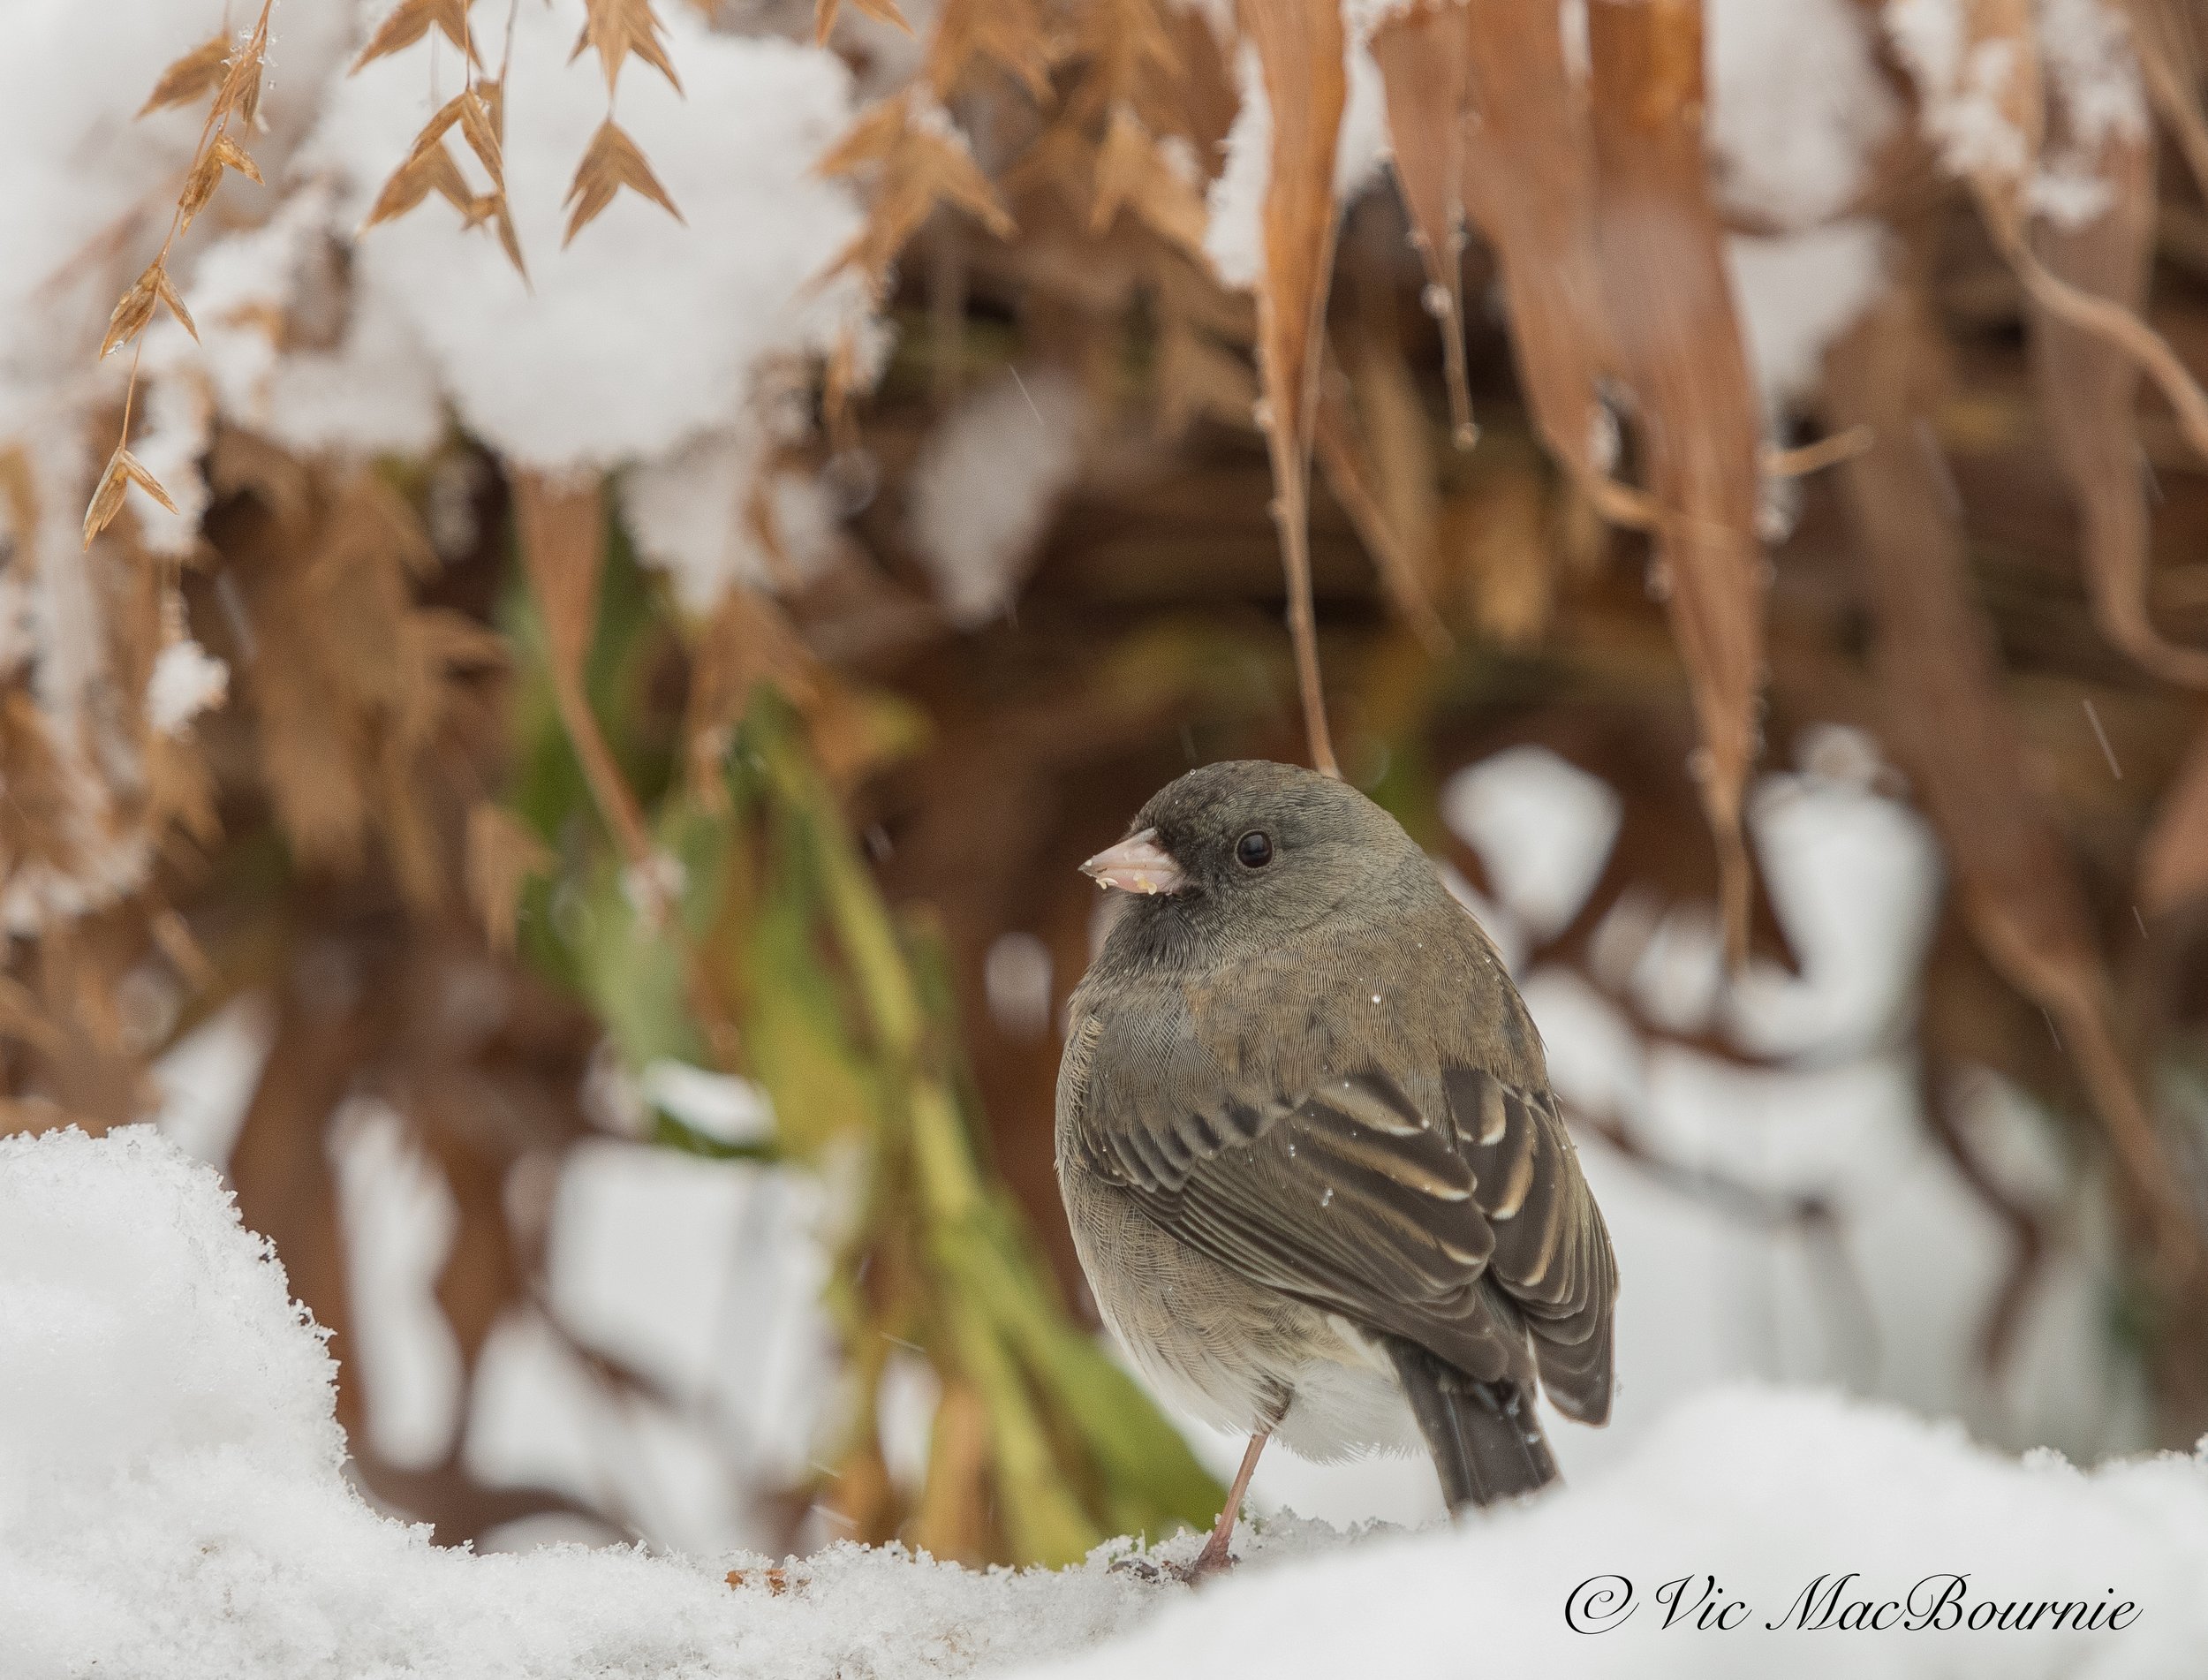 A Dark-eyed Junco among the Northern Sea Oats during an early snowfall.